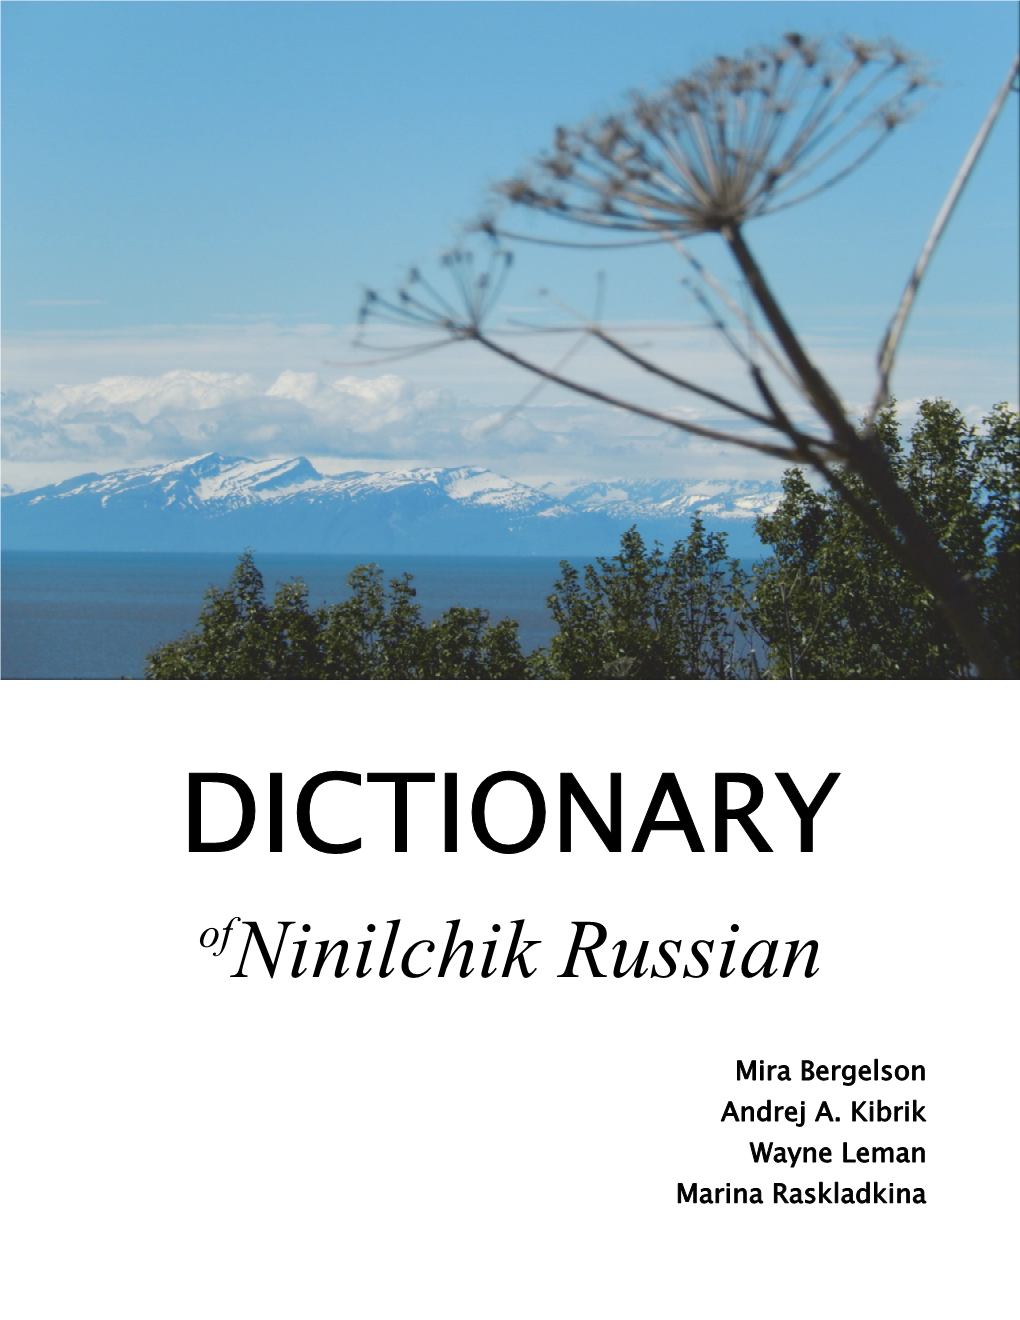 Ninilchik Russian Dictionary Project